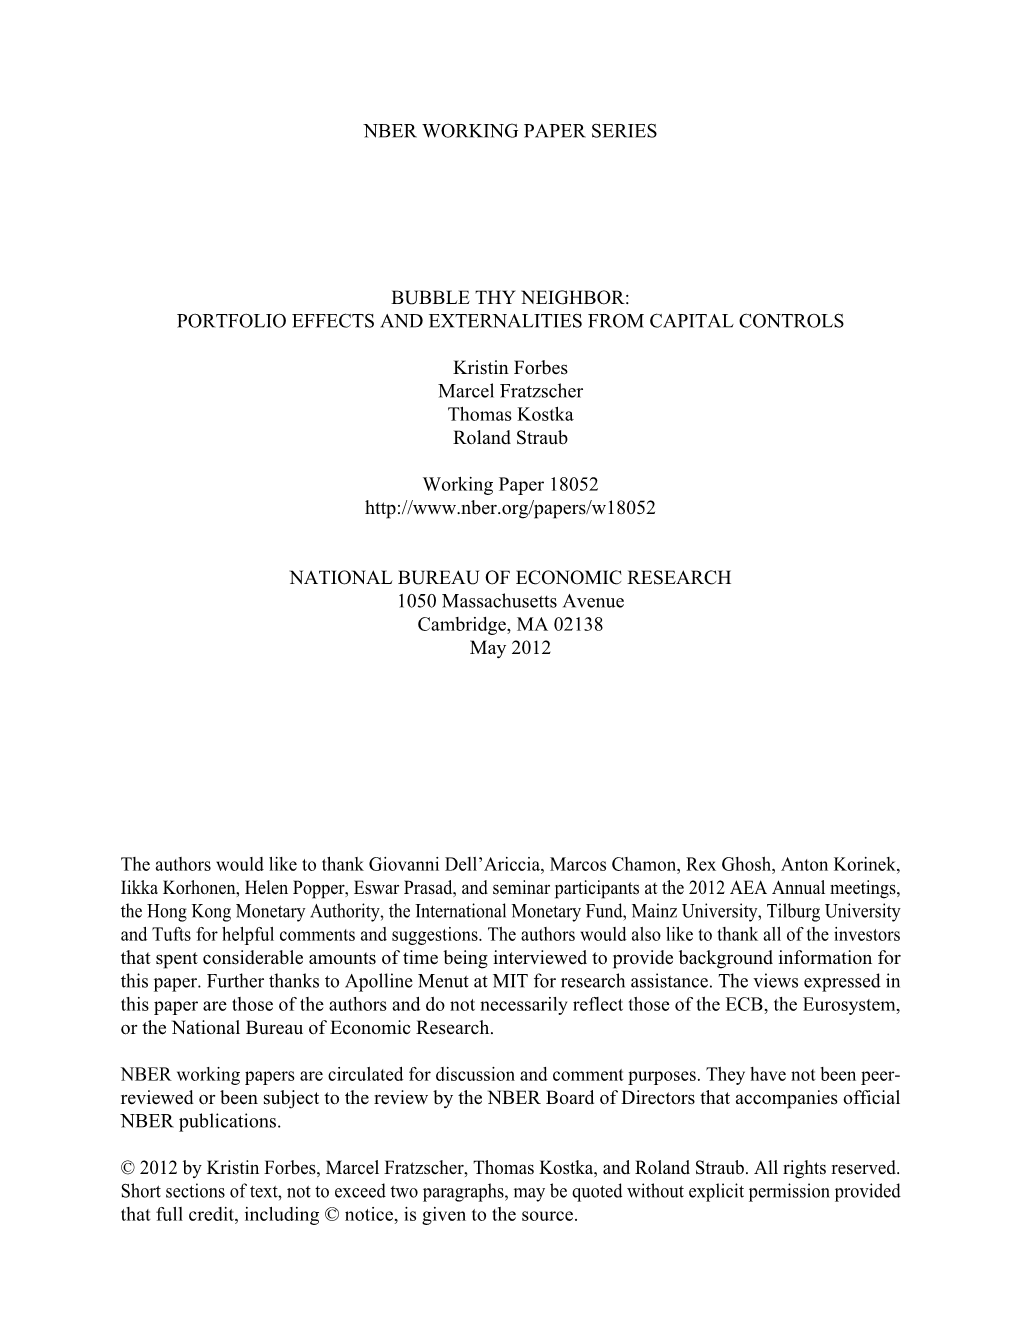 Bubble Thy Neighbor: Portfolio Effects and Externalities from Capital Controls